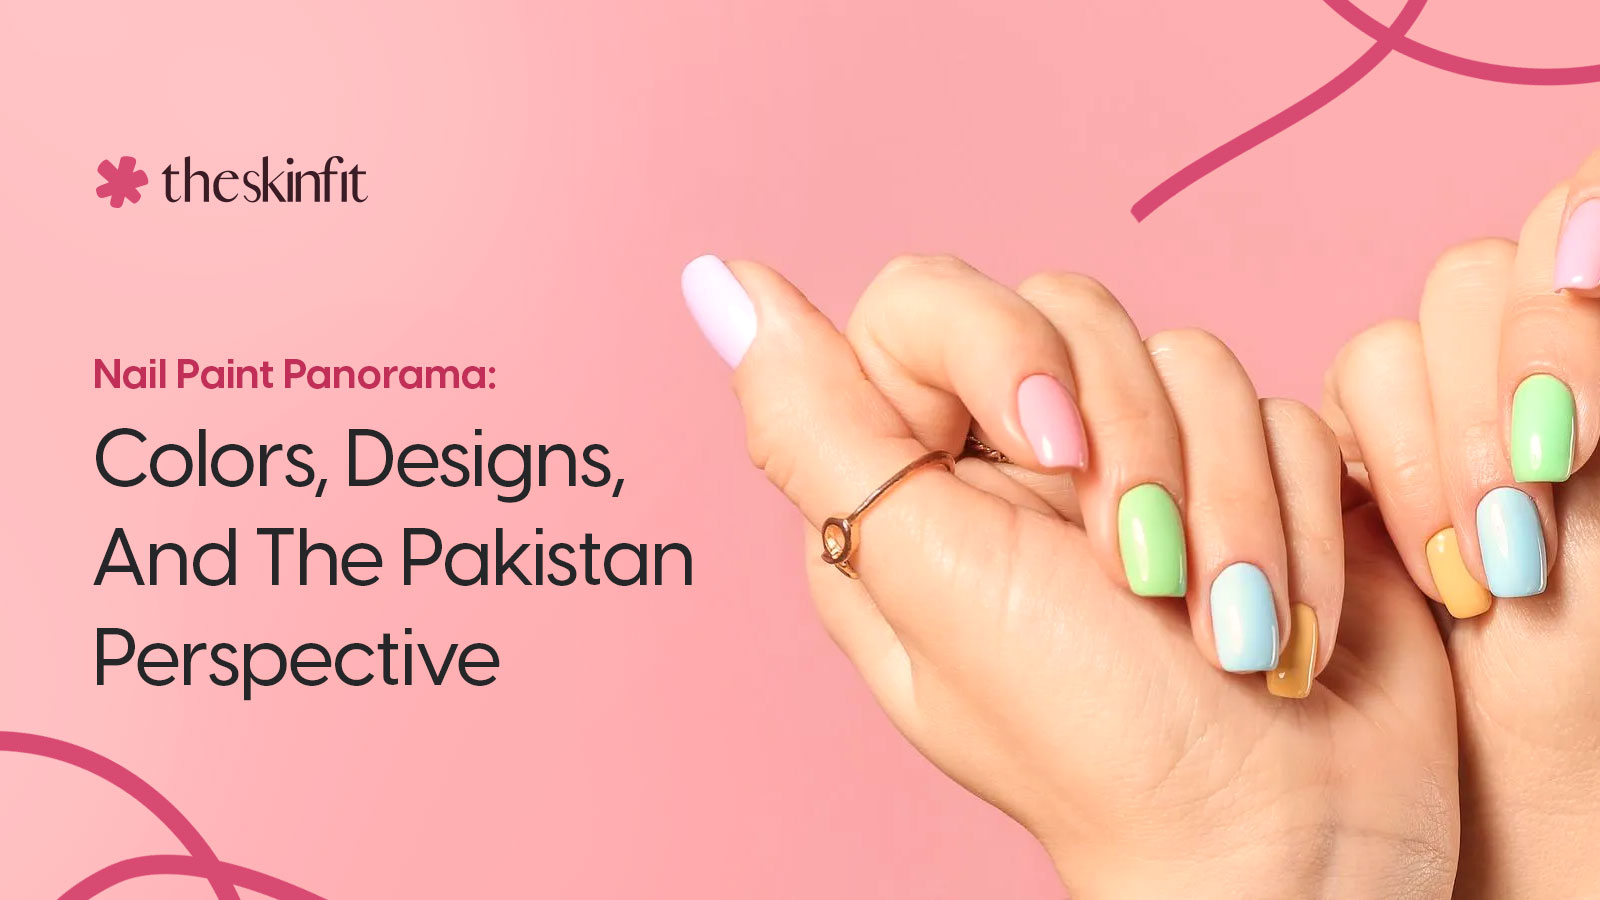 Nail Paint Panorama: Colors, Designs, And The Pakistan Perspective